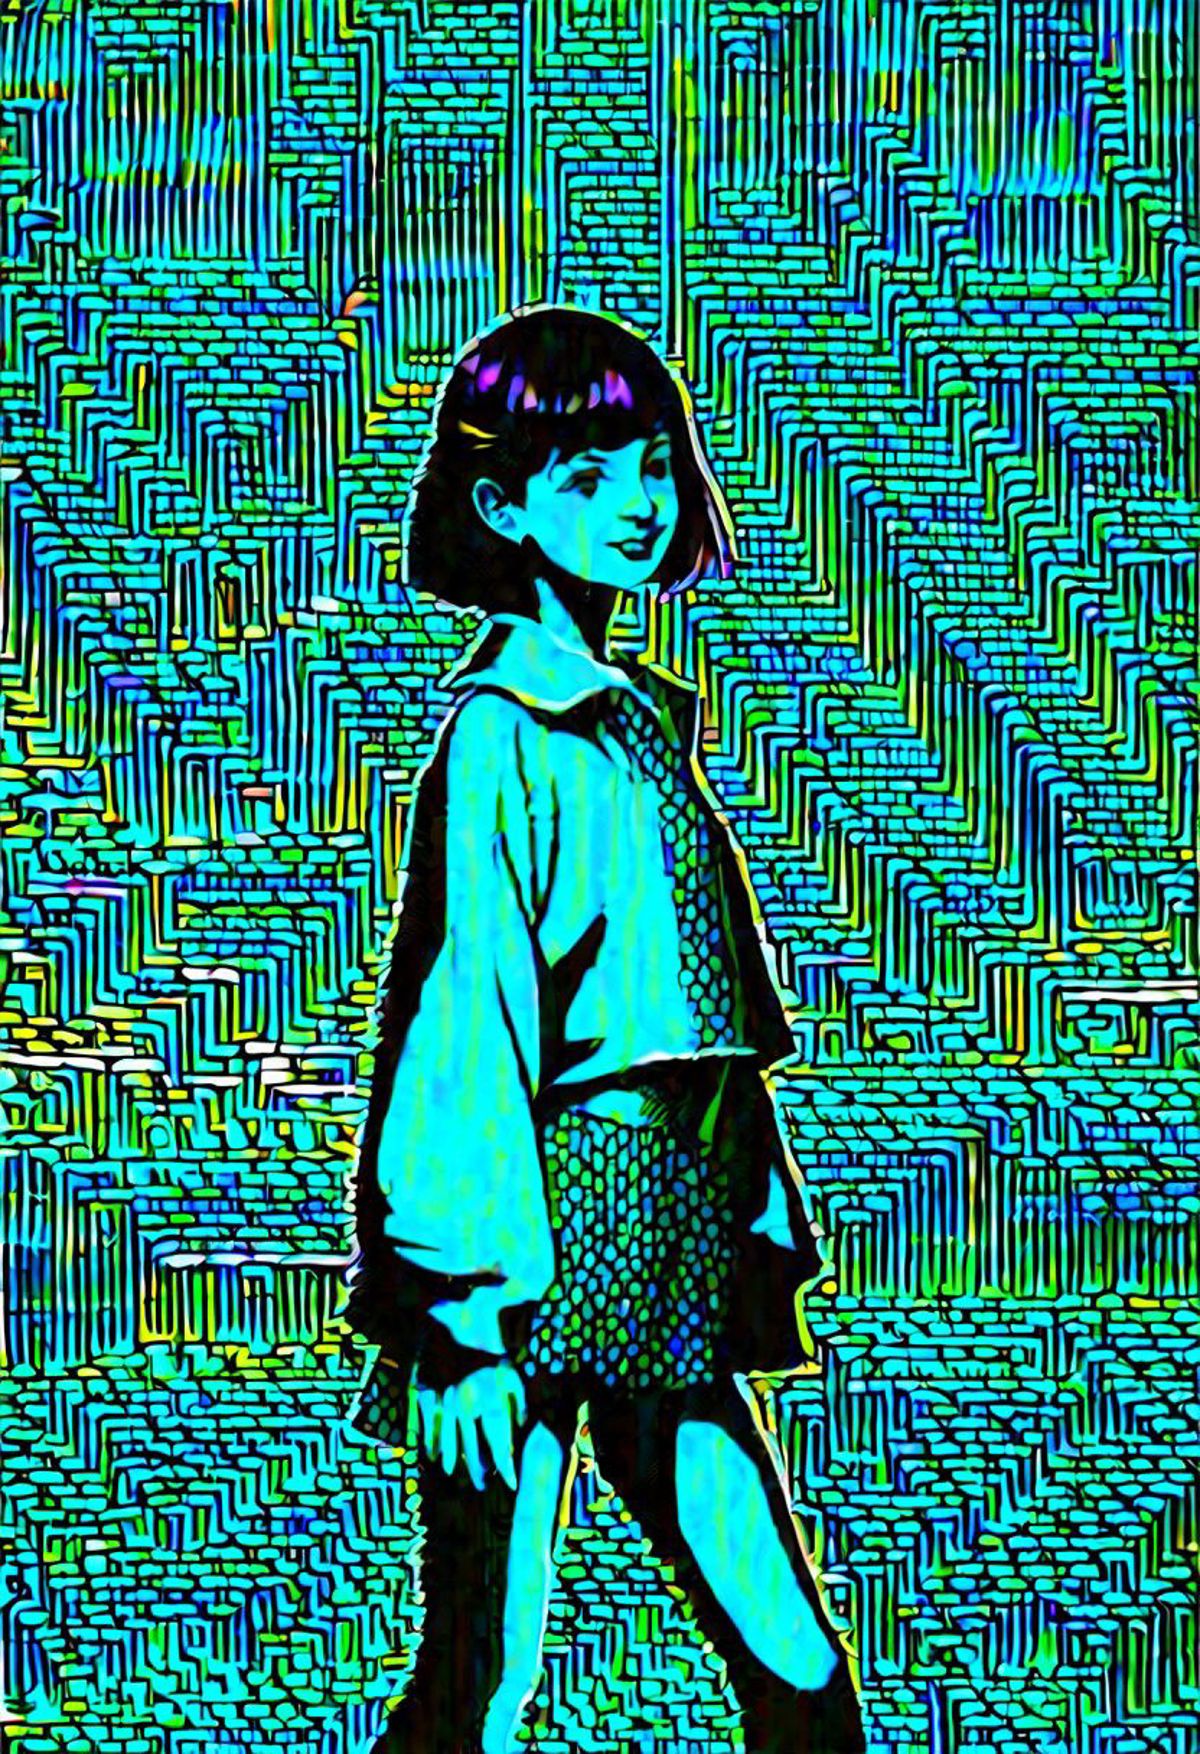 SDXL MS Paint Portraits image by ACLander